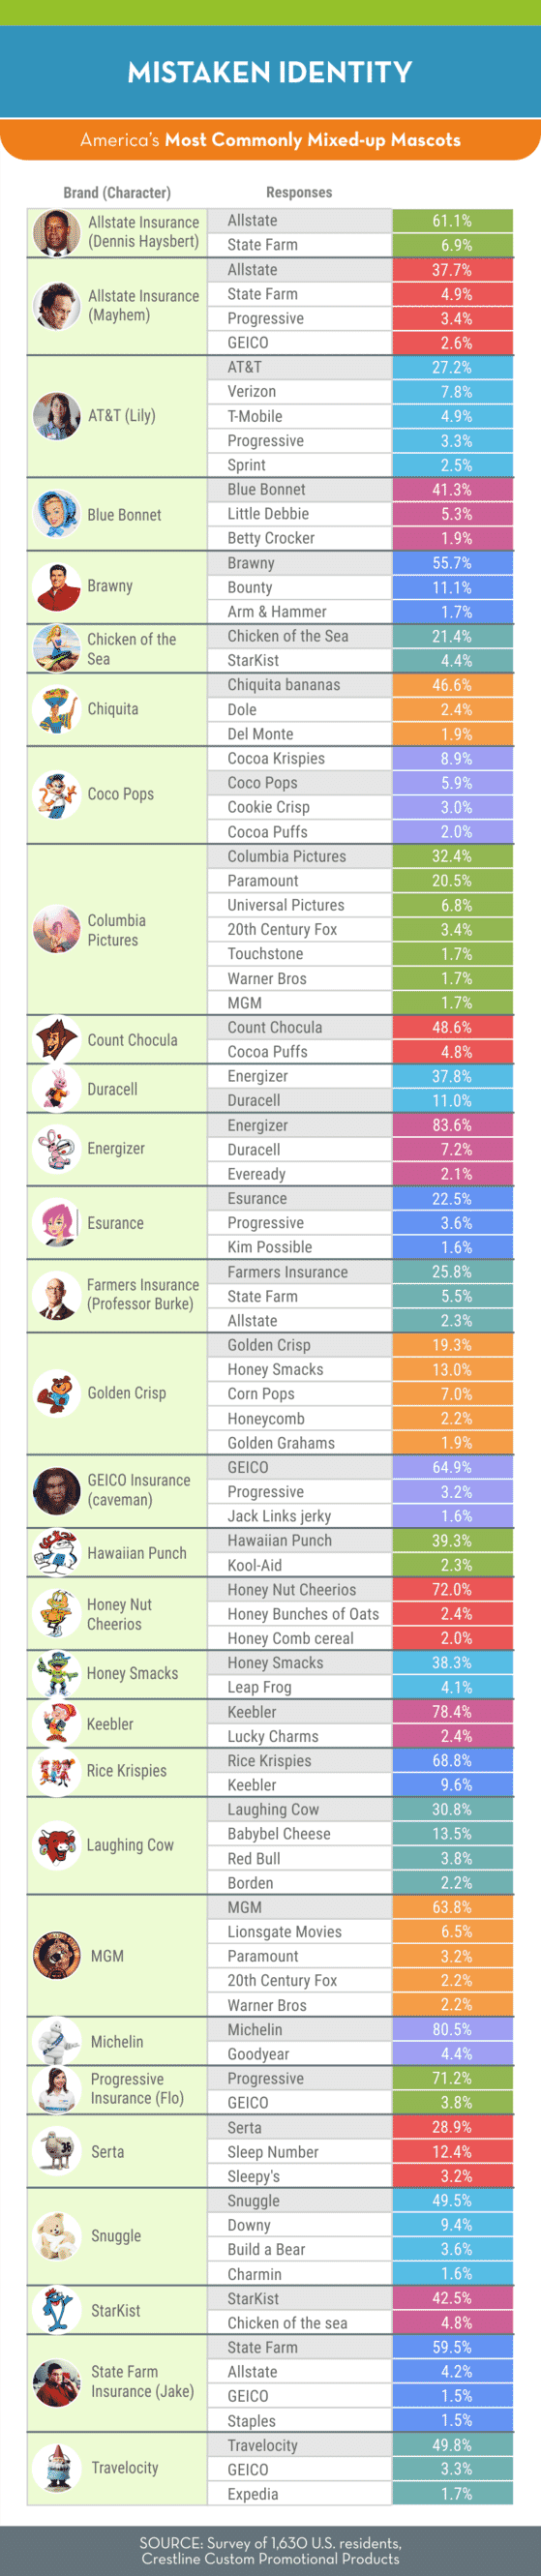 Most Commonly Mixed-up Mascots